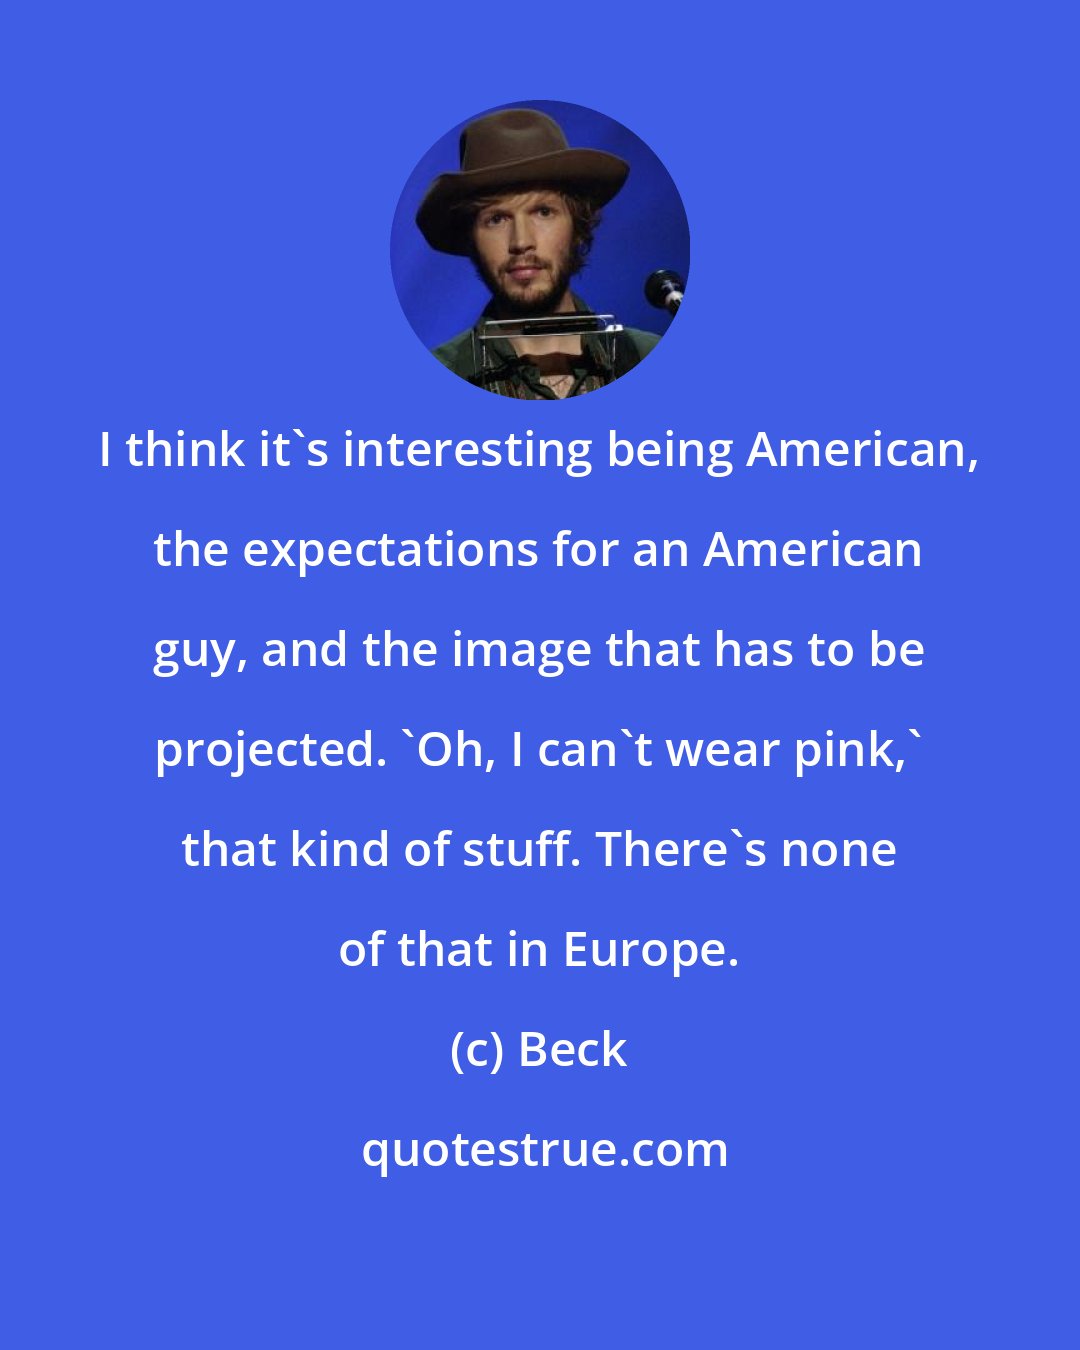 Beck: I think it's interesting being American, the expectations for an American guy, and the image that has to be projected. 'Oh, I can't wear pink,' that kind of stuff. There's none of that in Europe.